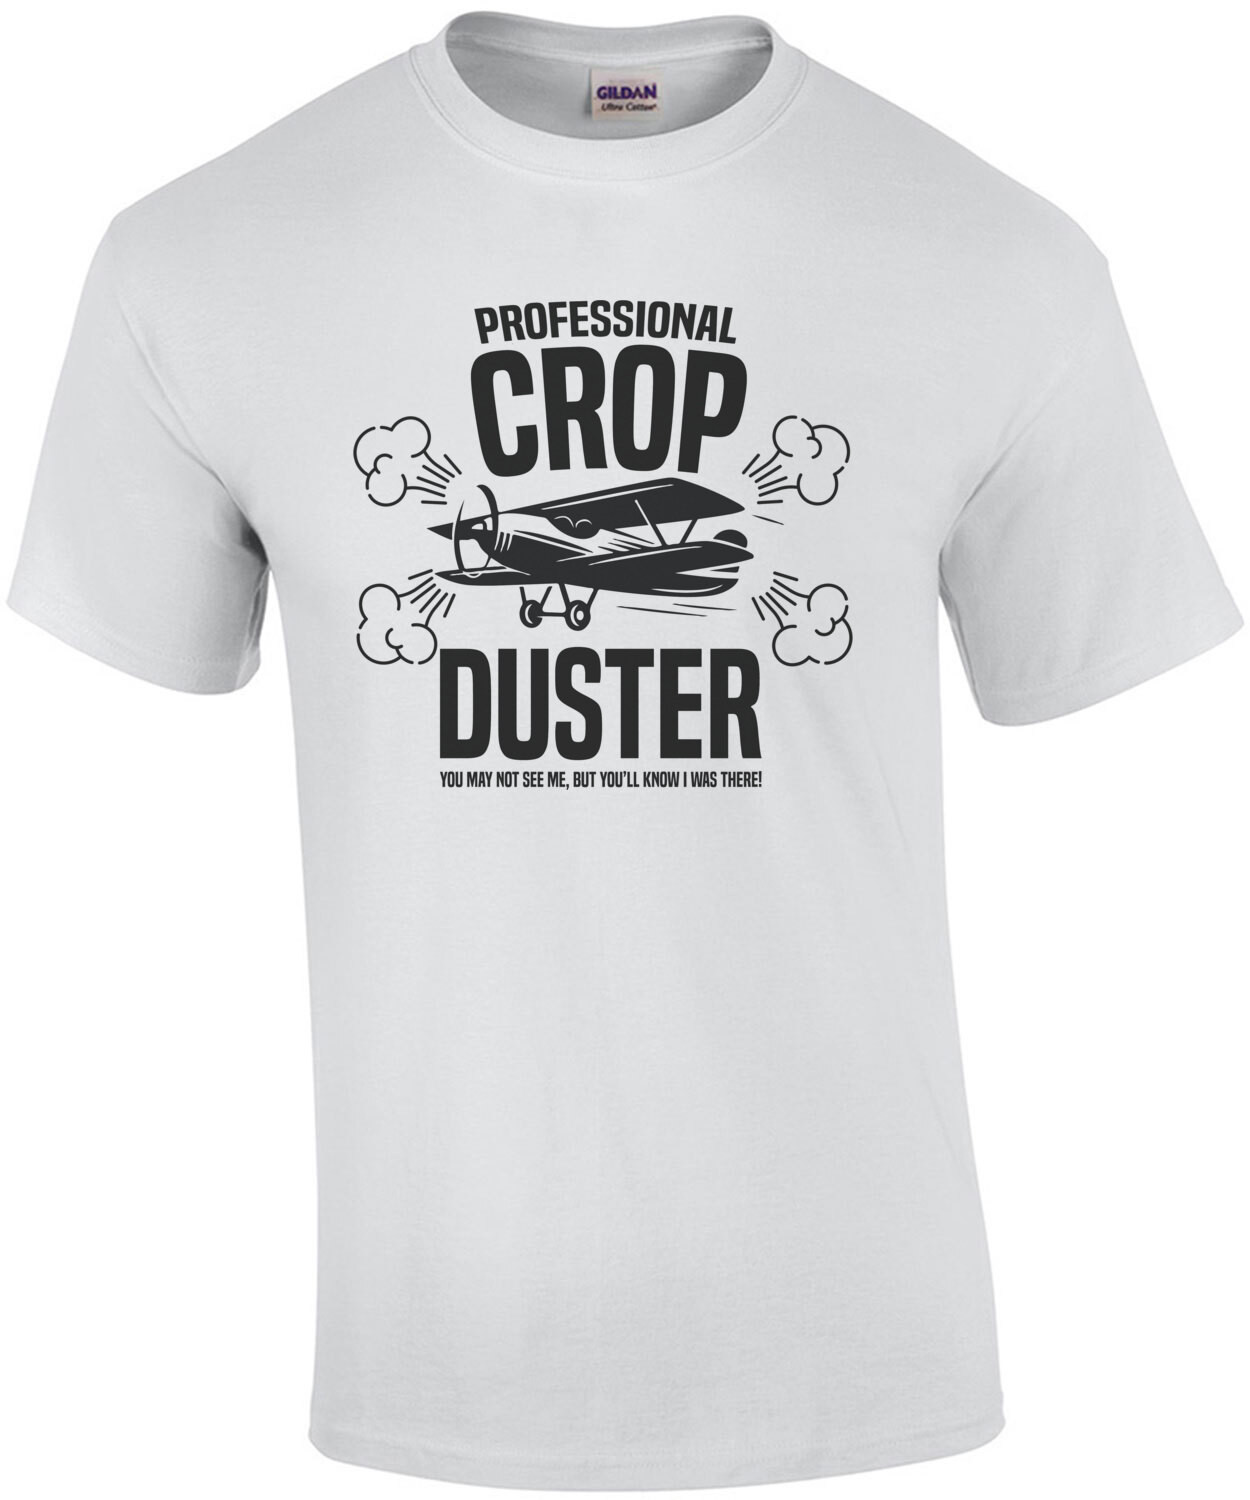 Professional Crop Duster - You may not see me, but you'll know I was there! - Fart T-Shirt